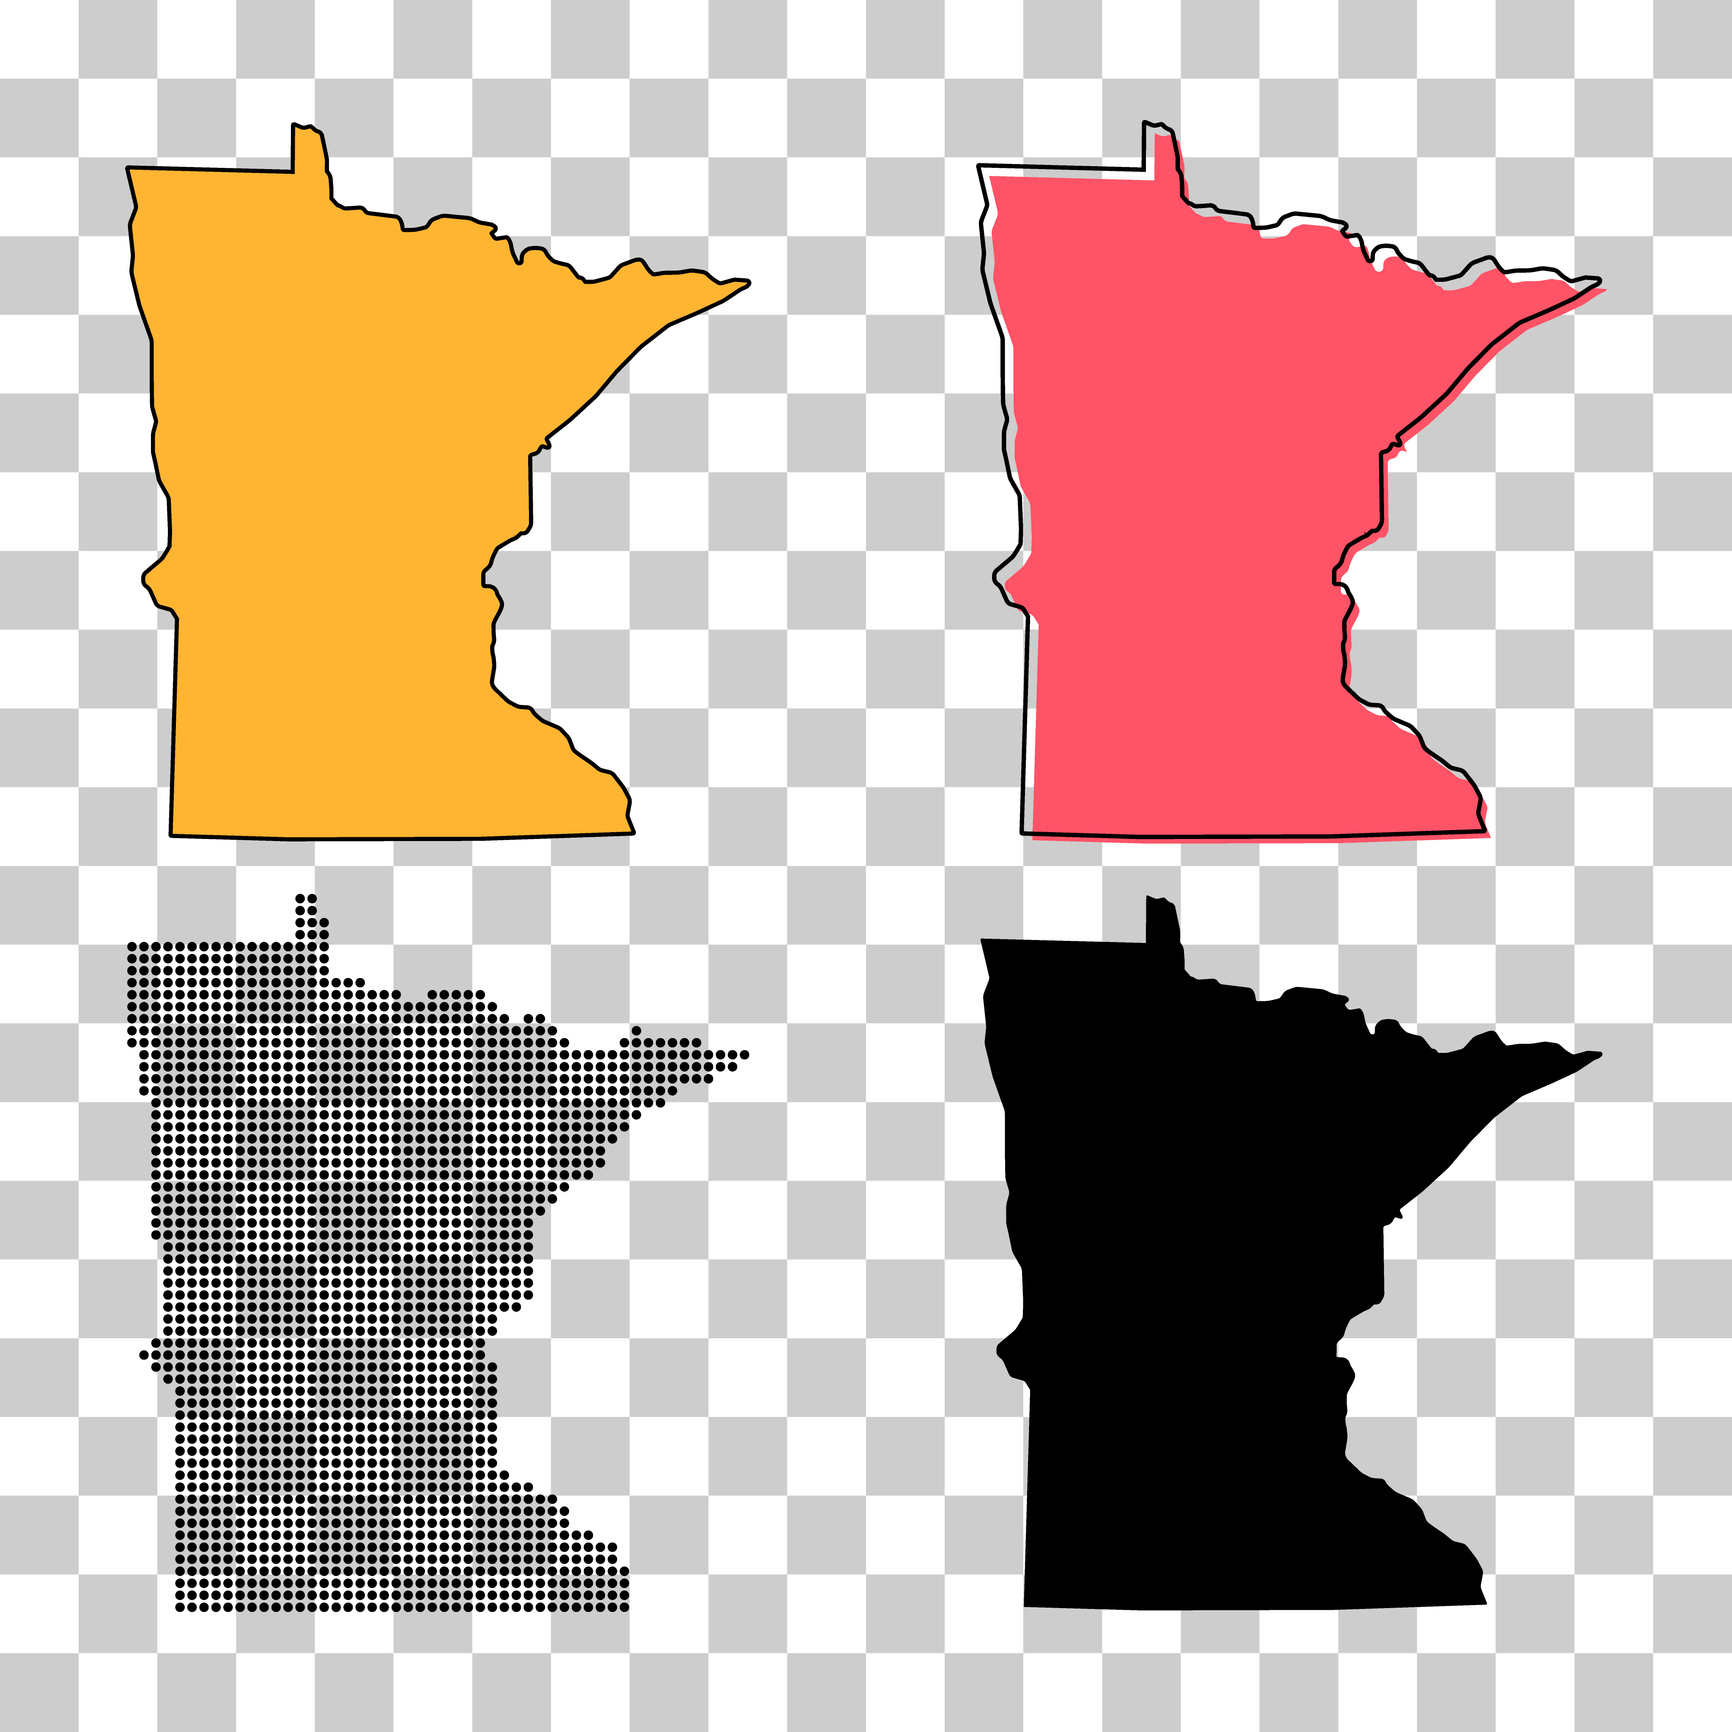 An expert chimes in on the new MN flag designs